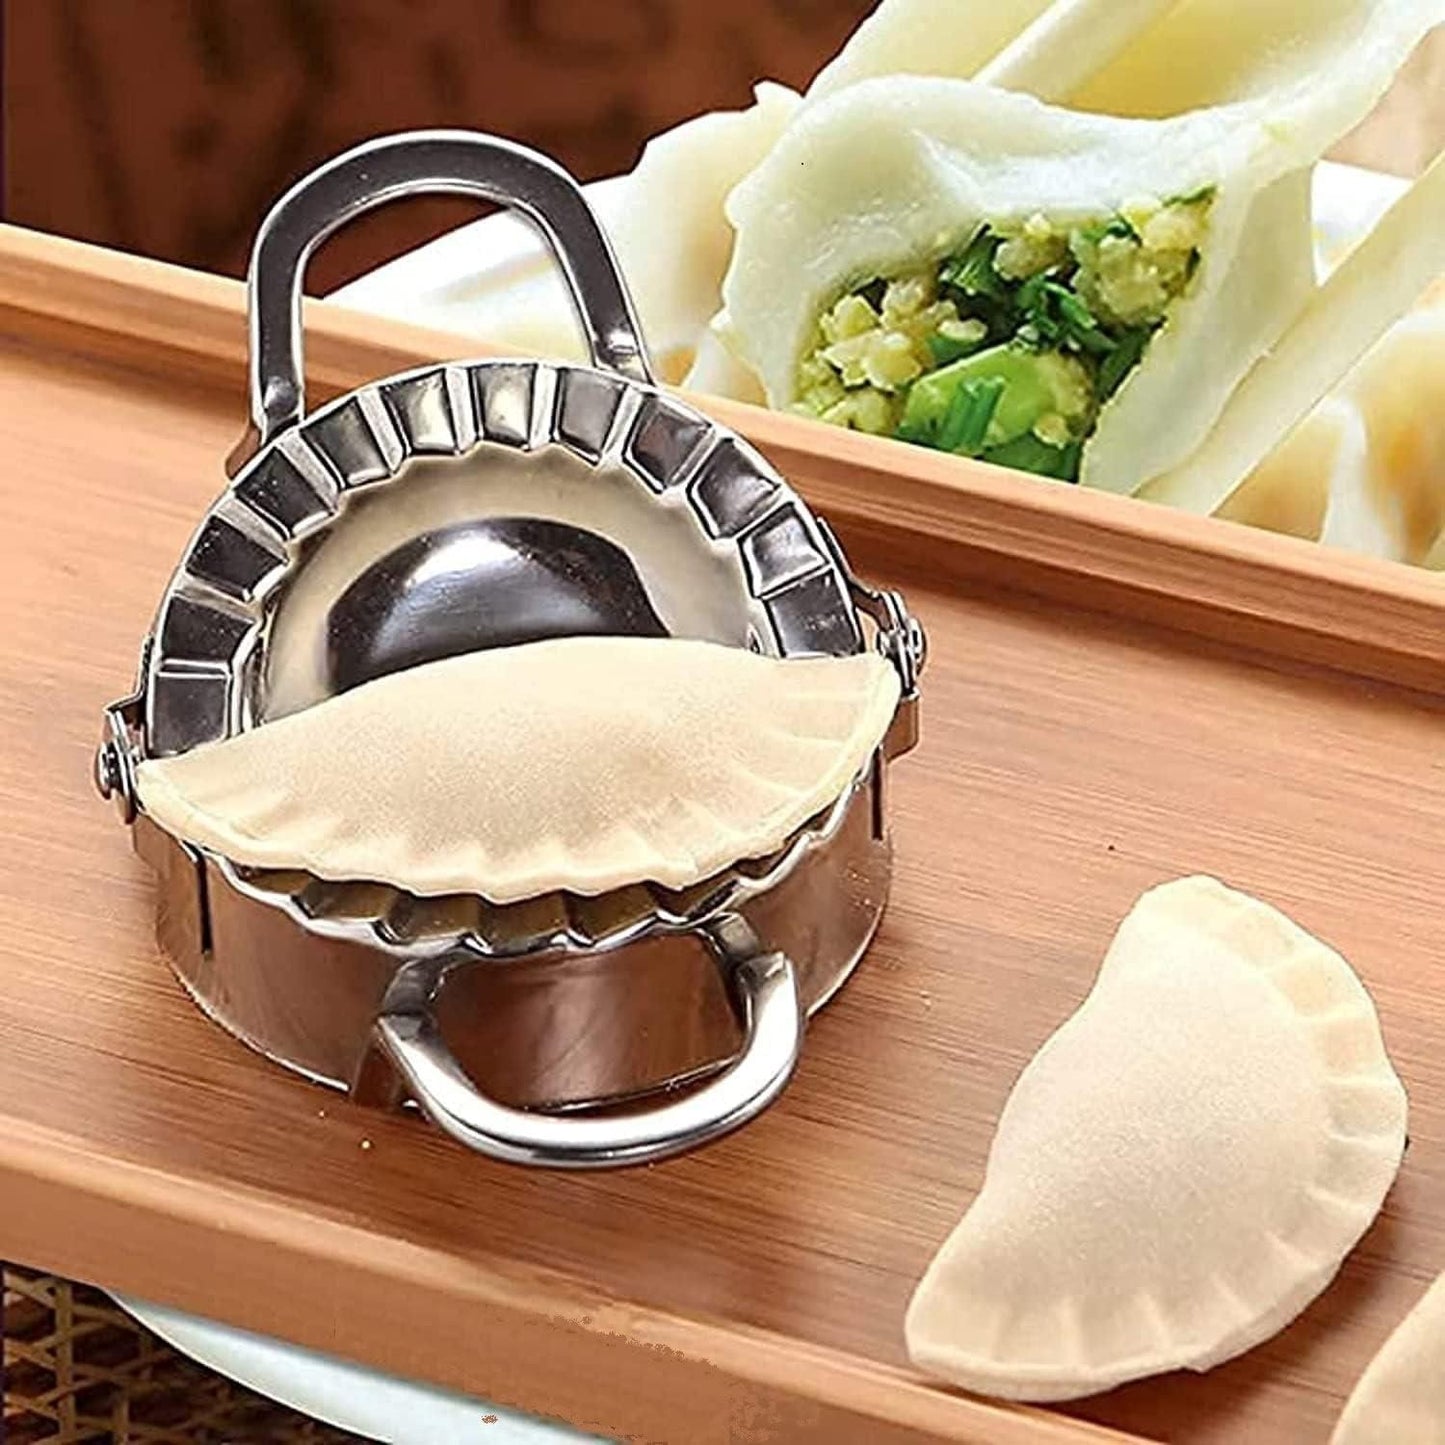 iPretty  Combo of Manual Stainless Steel Puri Cutter Roller Machine with Handle & Dumpling Maker(Momos Maker)for Home Baking Tools (pack of 2)